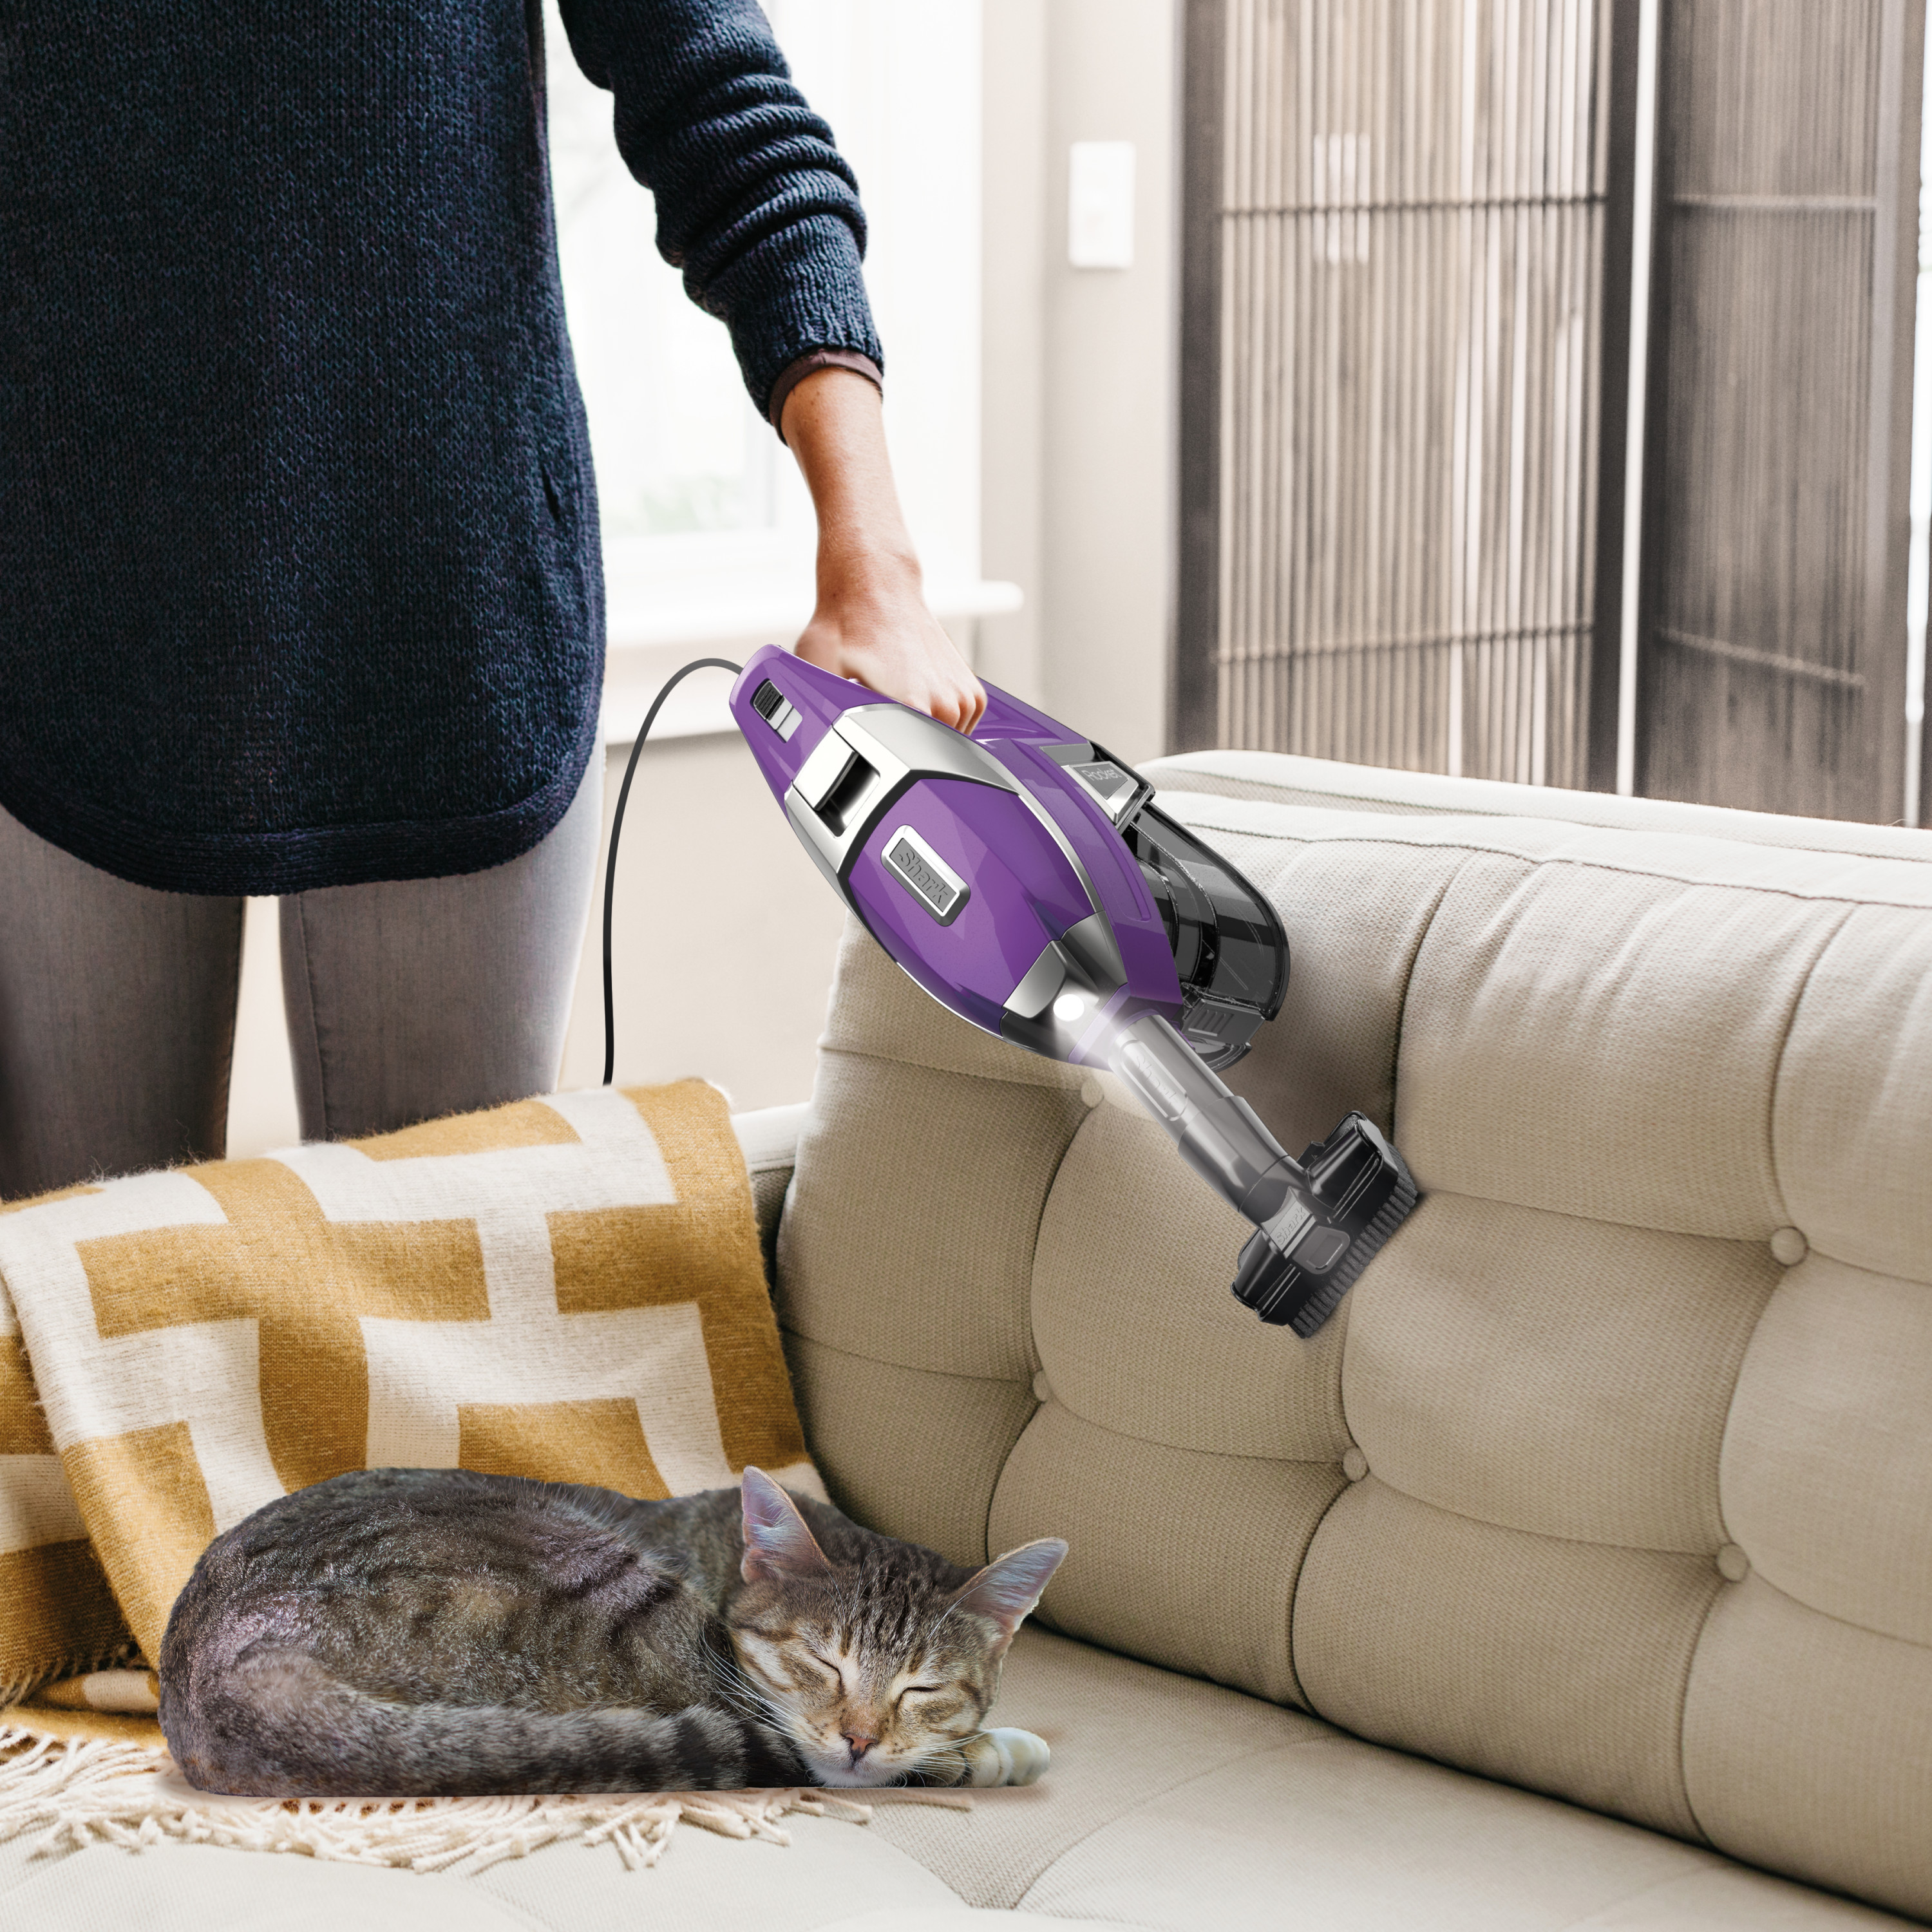 Shark Rocket Pet Pro Corded Stick Vacuum Cleaner with Self-Cleaning Brushroll, ZS350 - image 3 of 11